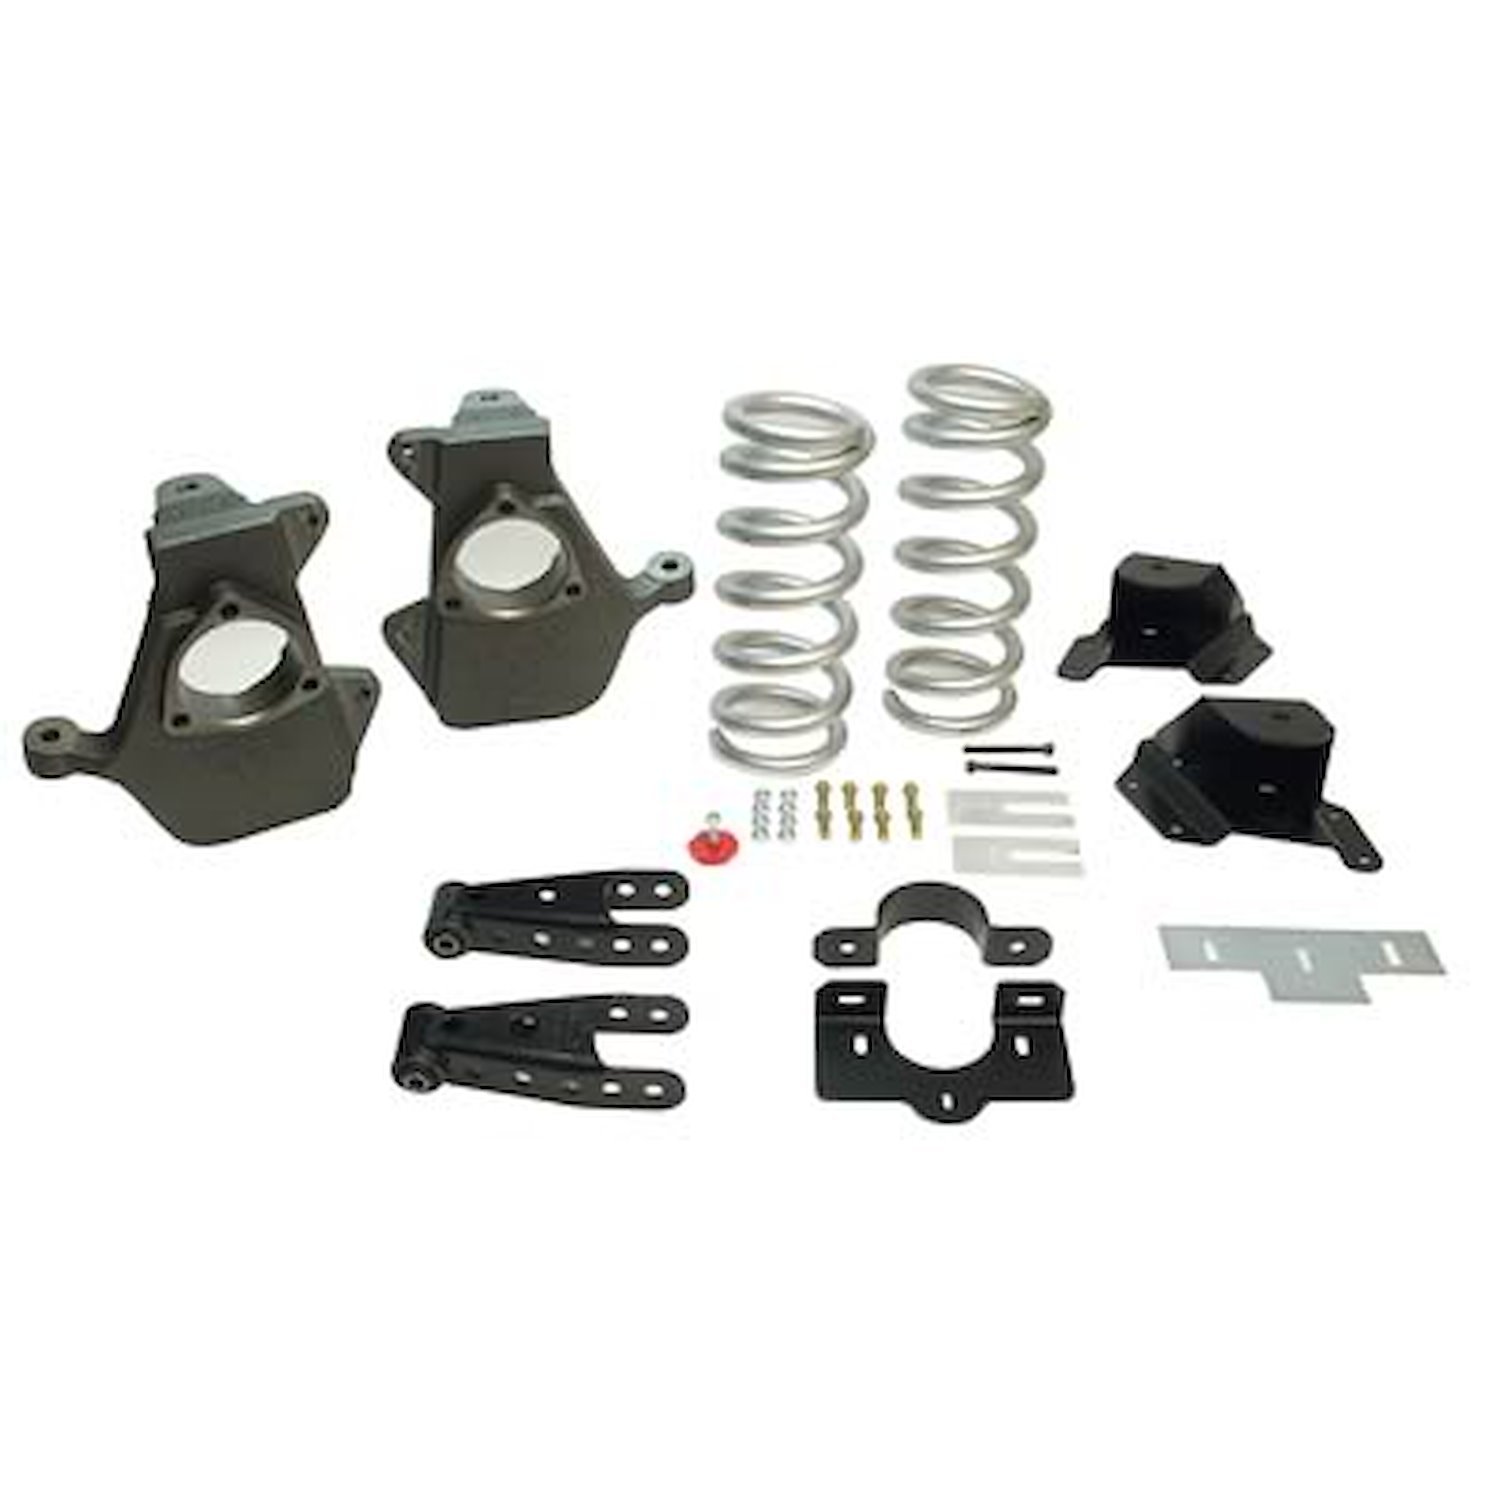 Complete Lowering Kit for 1985-1995 Chevy Astro/GMC Safari